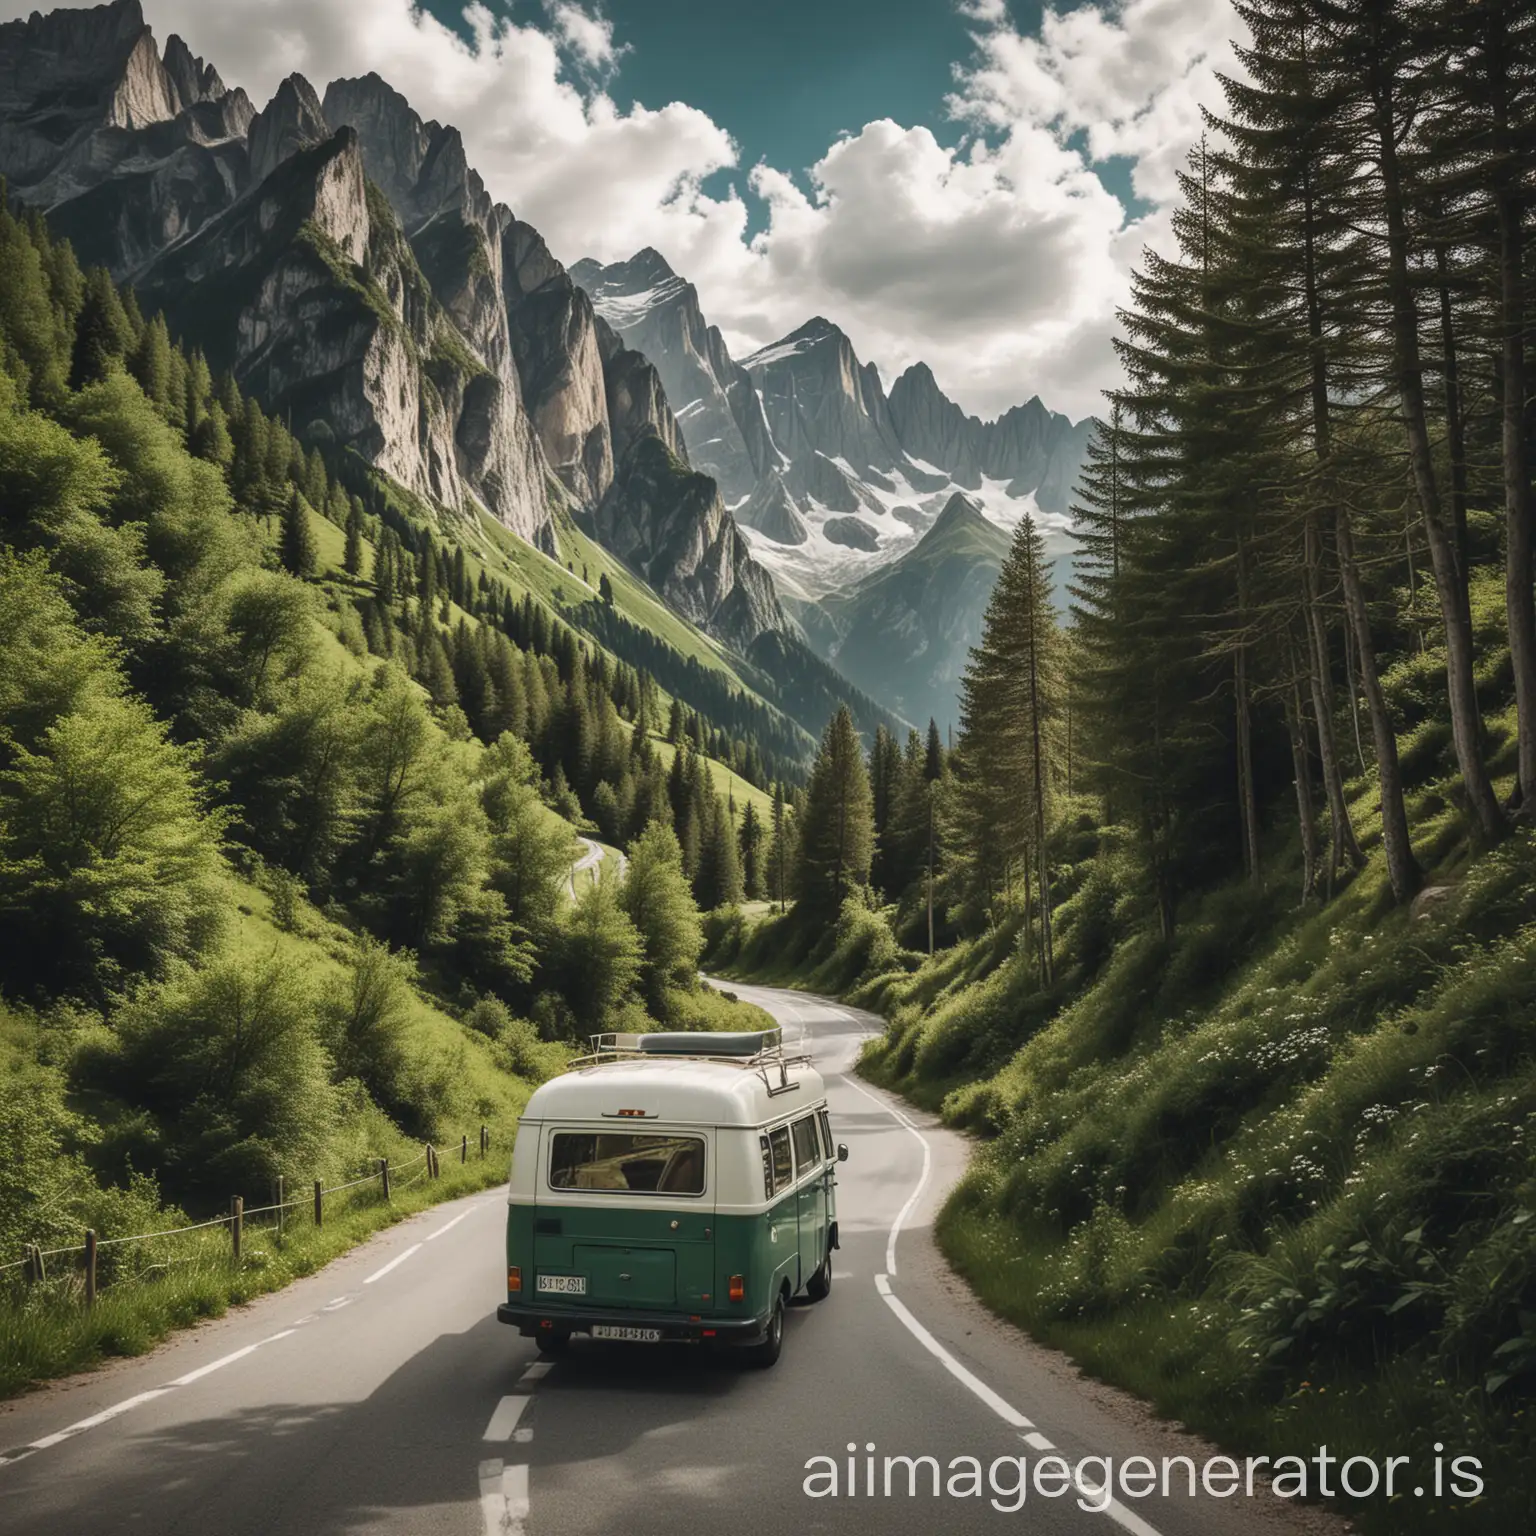 A vintage camper van driving on a winding road through a lush green alpine valley. In the background, dramatic mountain peaks rise sharply against a clear sky.